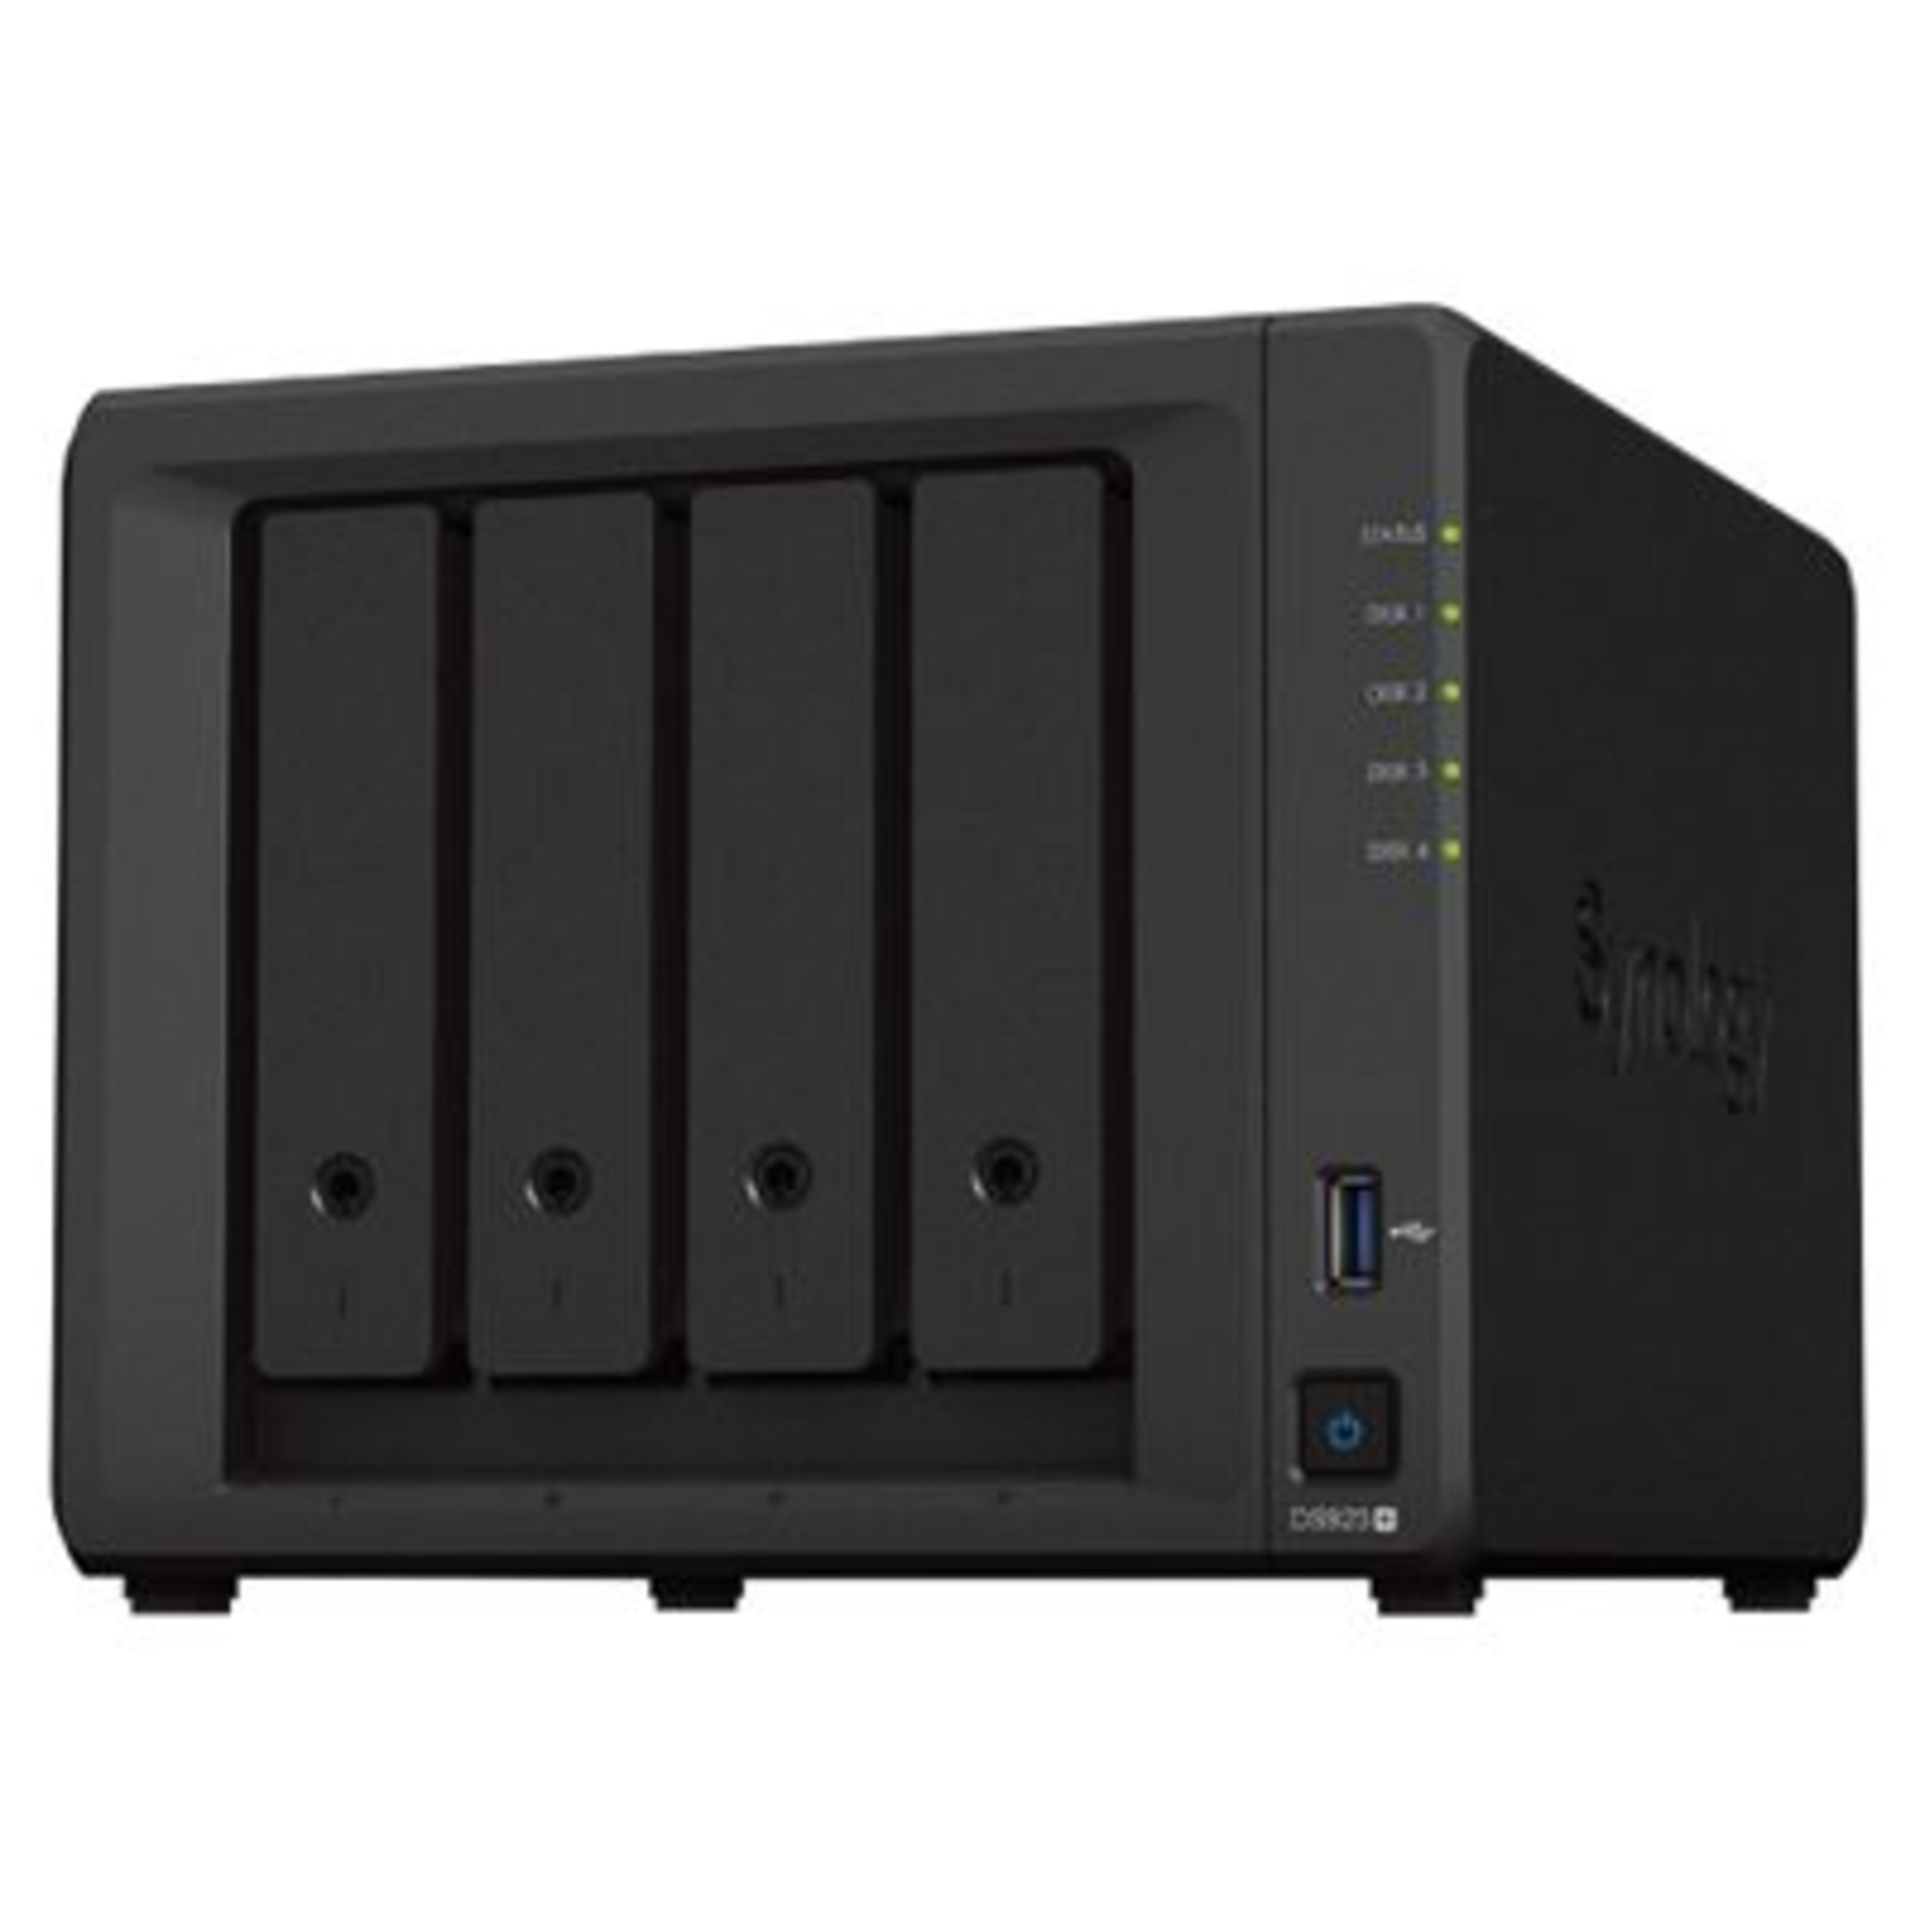 Synology DS920+ 4-Bay NAS Enclosure w/ 2 x M.2 NVMe Slots (4GB RAM). - P1. RRP £675.00. The Synology